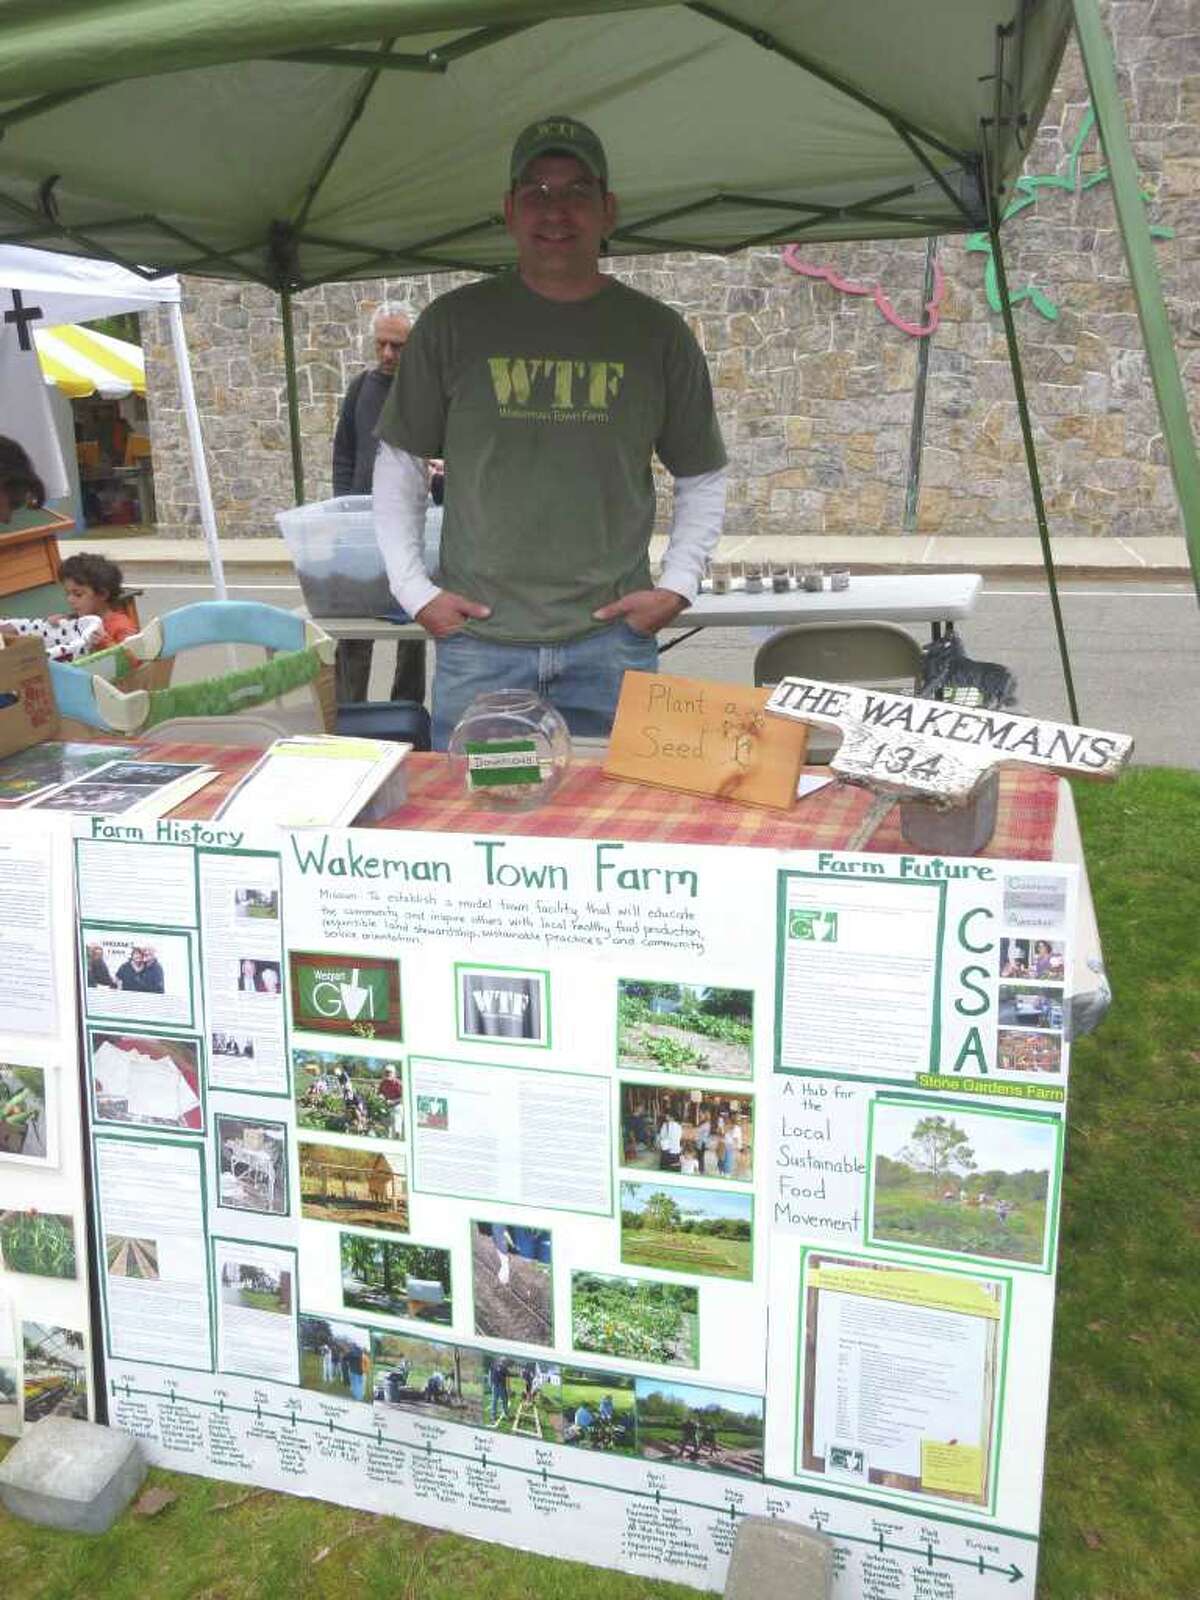 Mike Aitkenhead, of Wakeman Town Farm, said the homestead aims to be the hub of the local food movement in Westport. The farm booth was among the displays at the Green Earth Fair in Westport on Saturday.